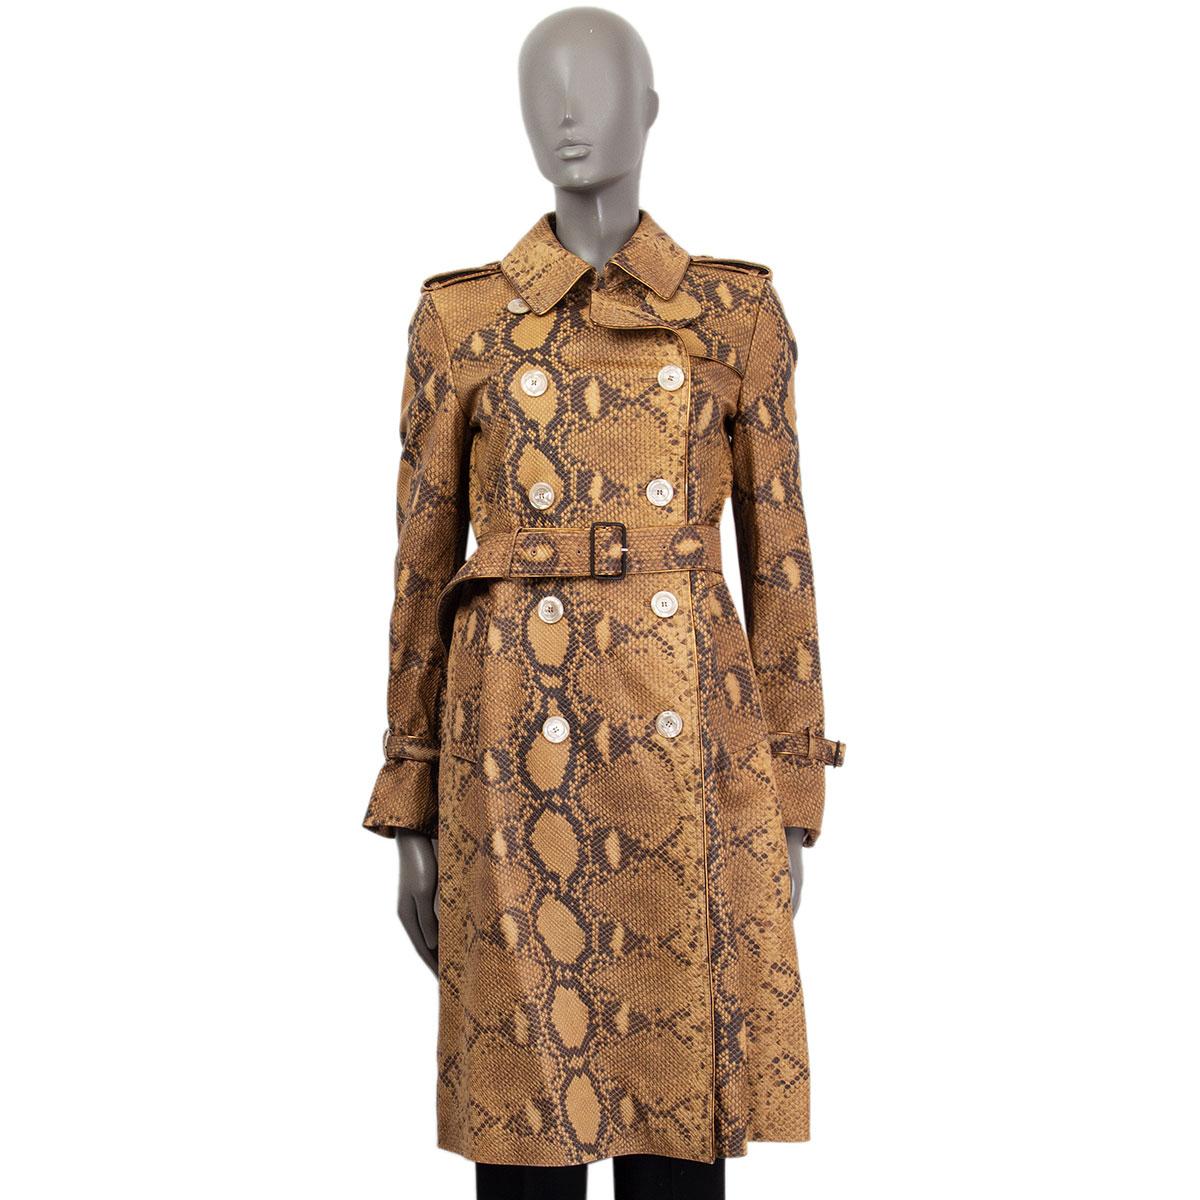 Gucci python print trench coat in pale mustard, light brown, black and bronze lamb leather with a notch collar, buttoned epaulettes, slit pockets and a matching belt. Has bronze tone leather border finishing. Closes on the front with buttons. Lined